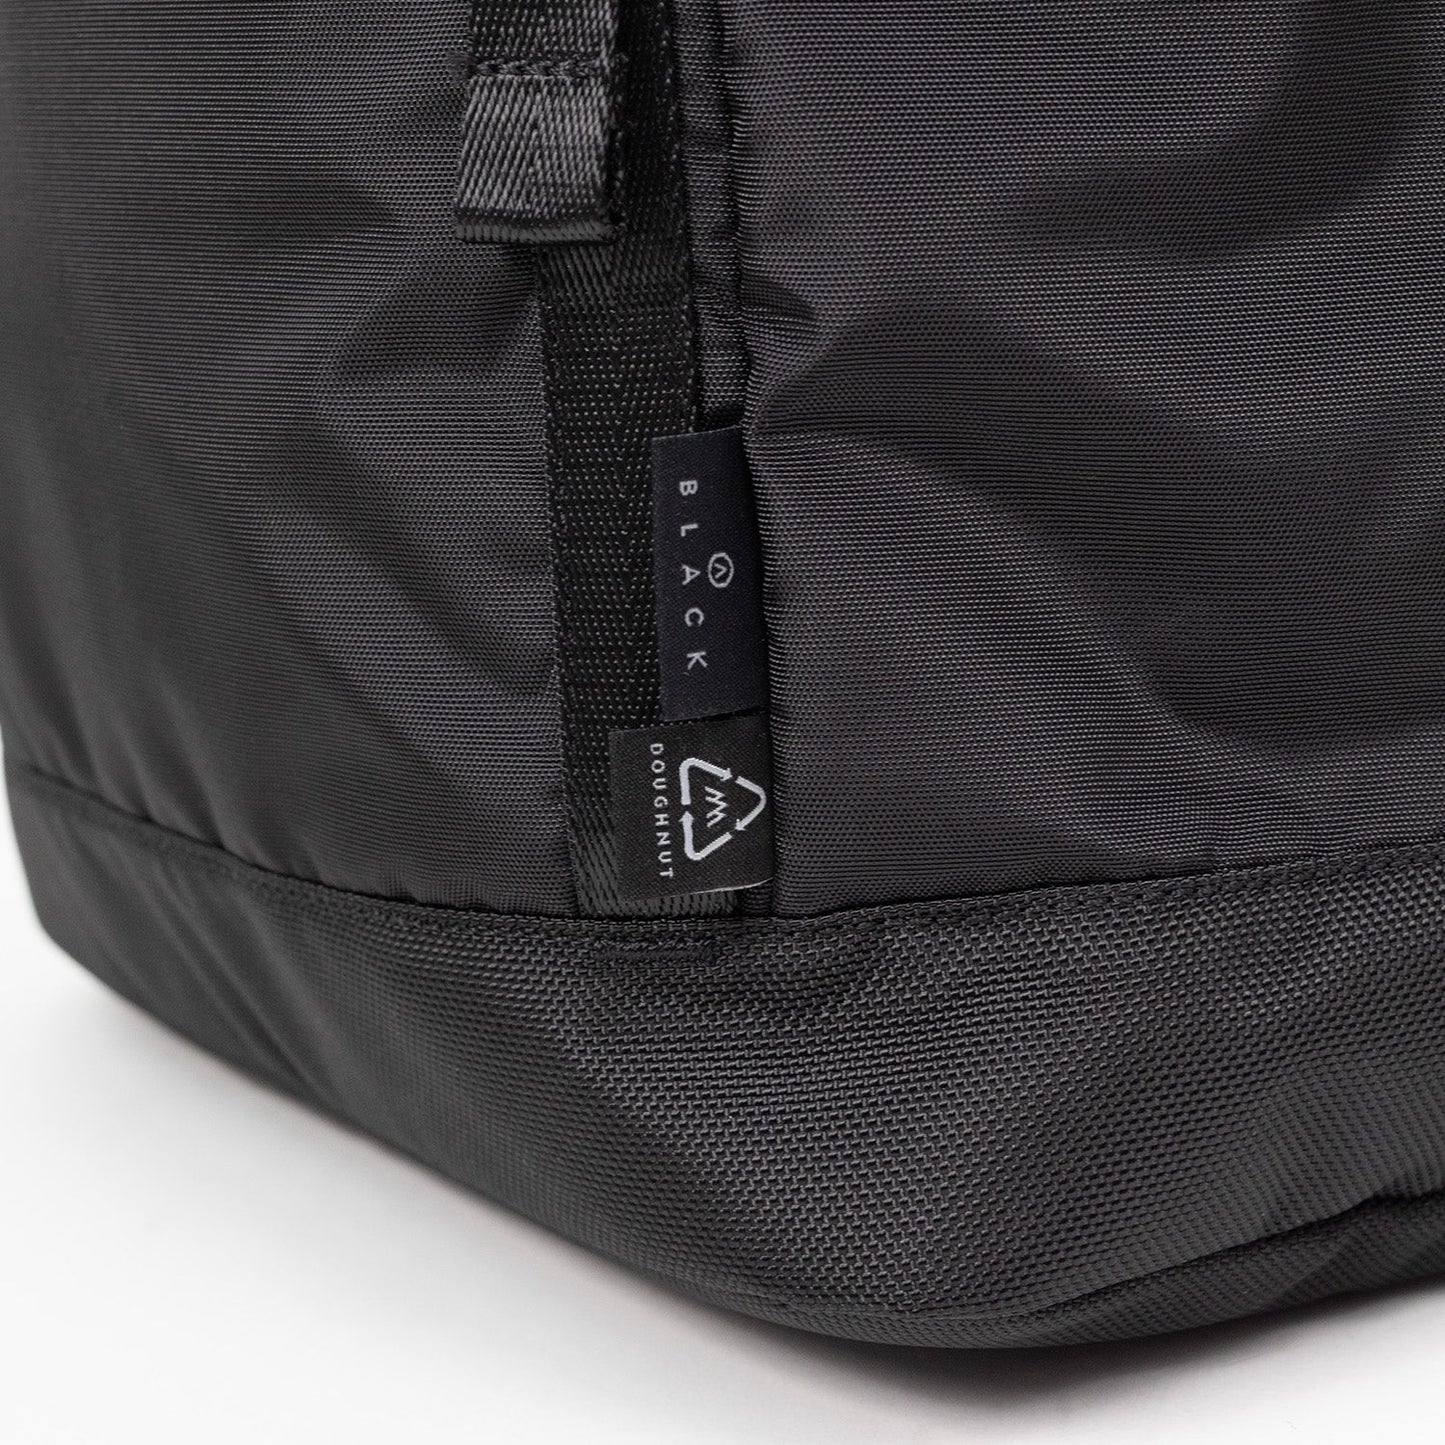 Lucid Light The Actualise Series Backpack